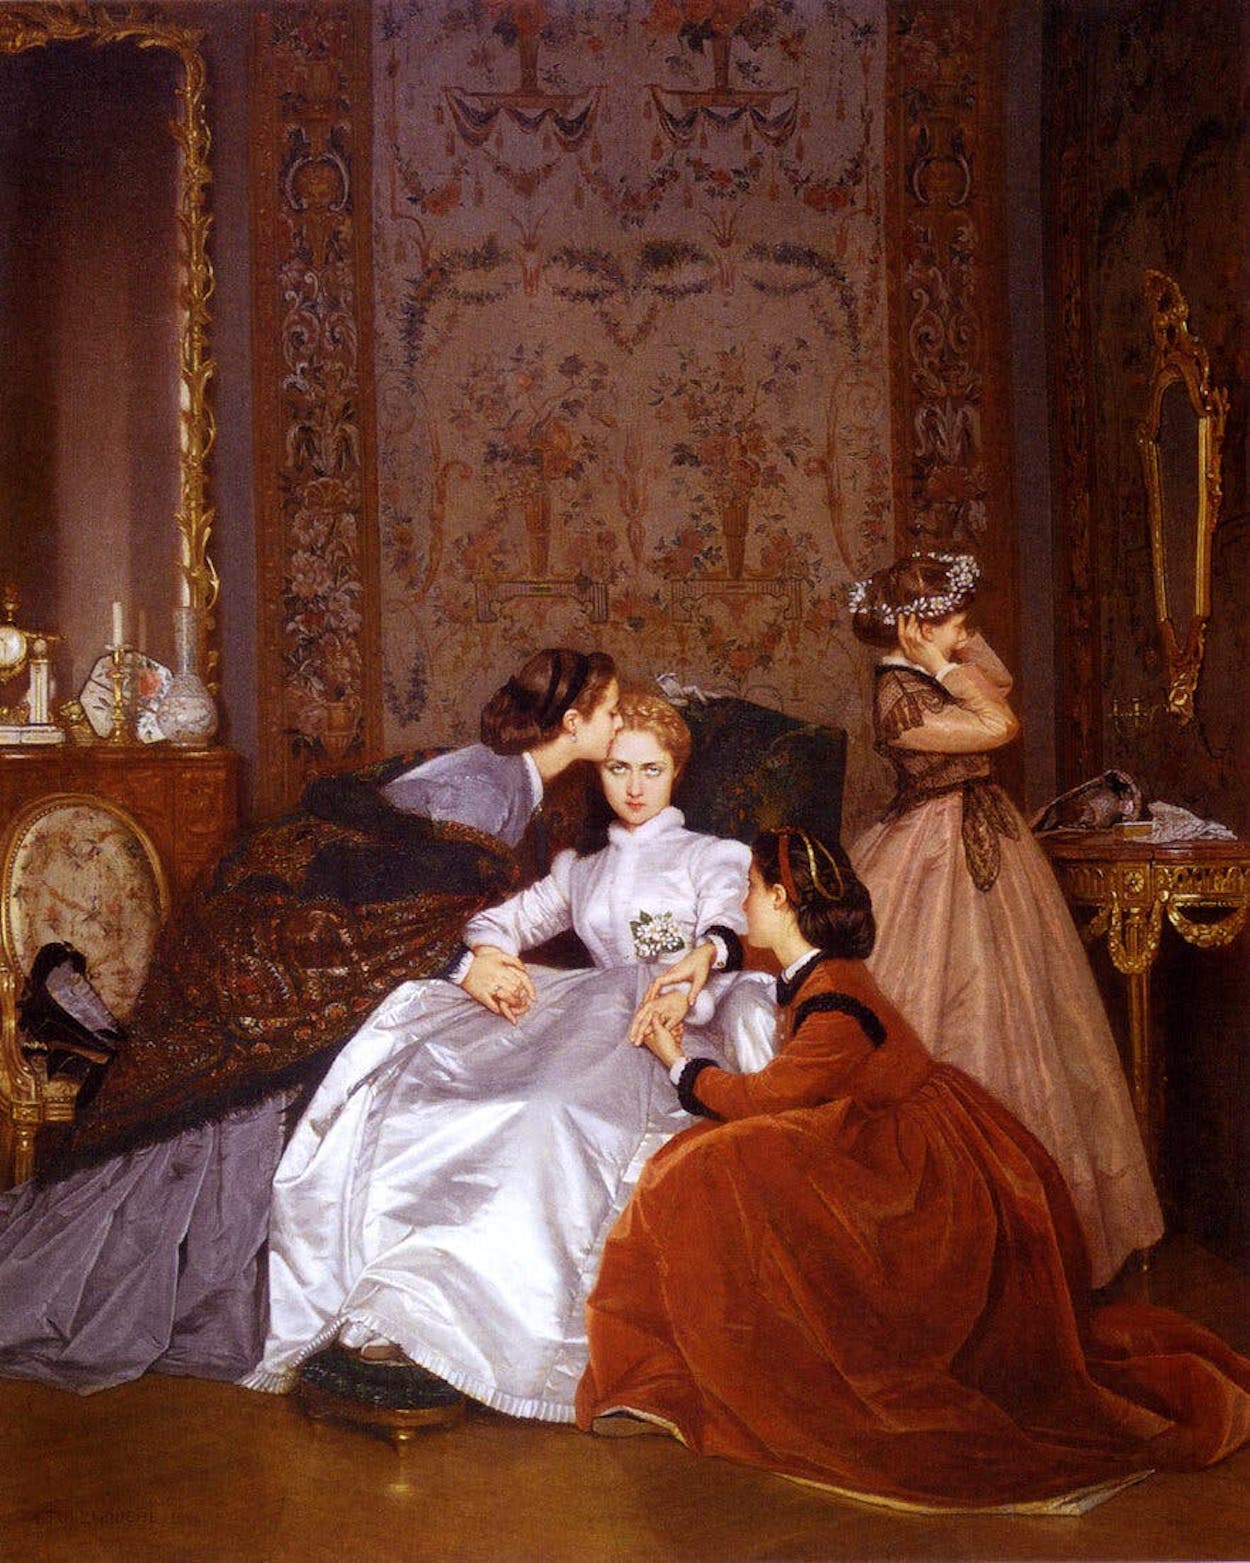 The Hesitant Fiancée by Auguste Toulmouche - 1866 - 65 x 54 cm private collection